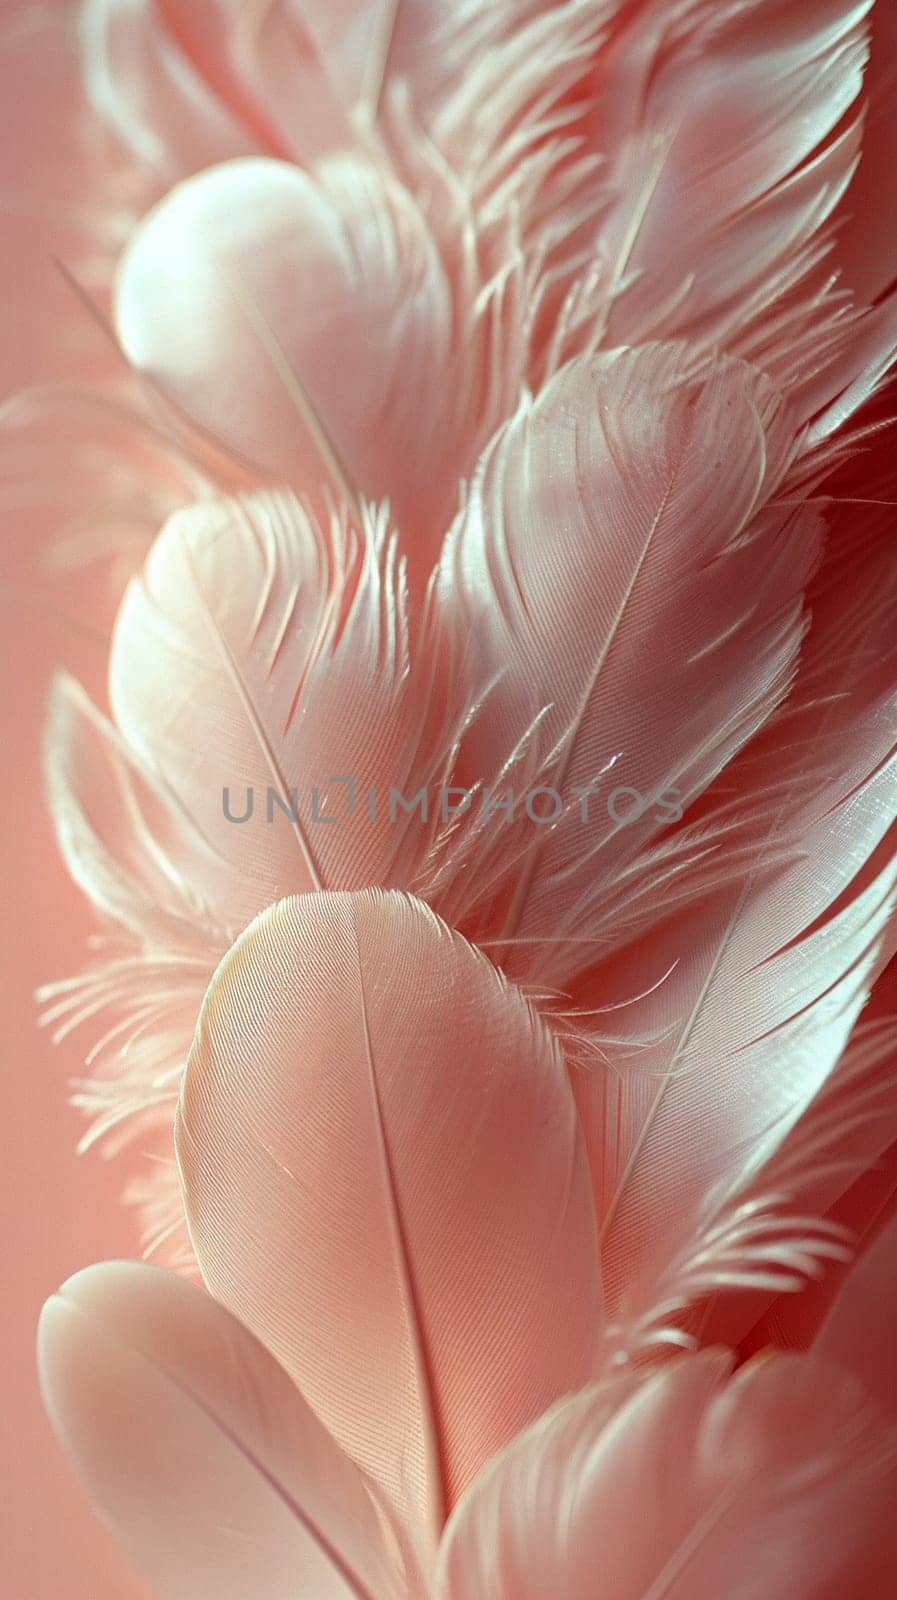 Close-up of feathers in soft light, great for texture and delicate design projects.